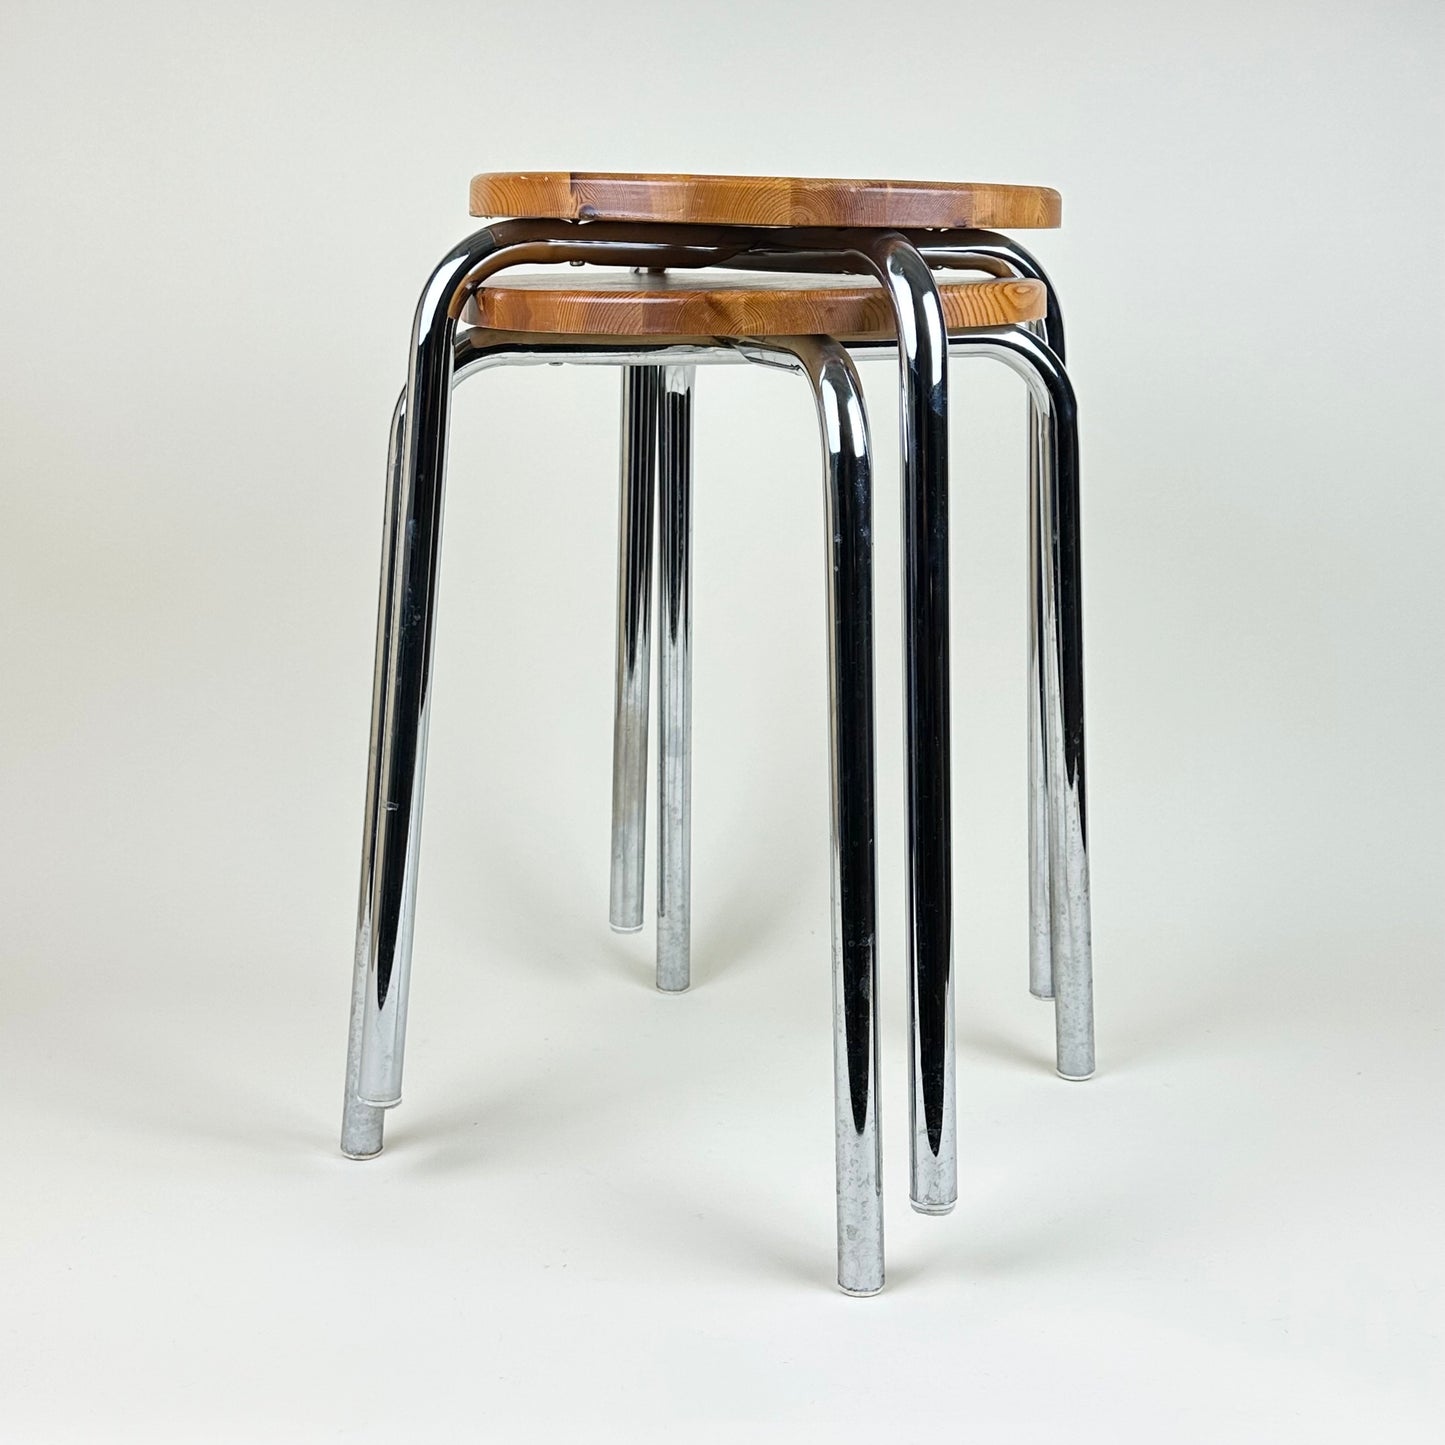 Pair of wood and chrome stools, vintage